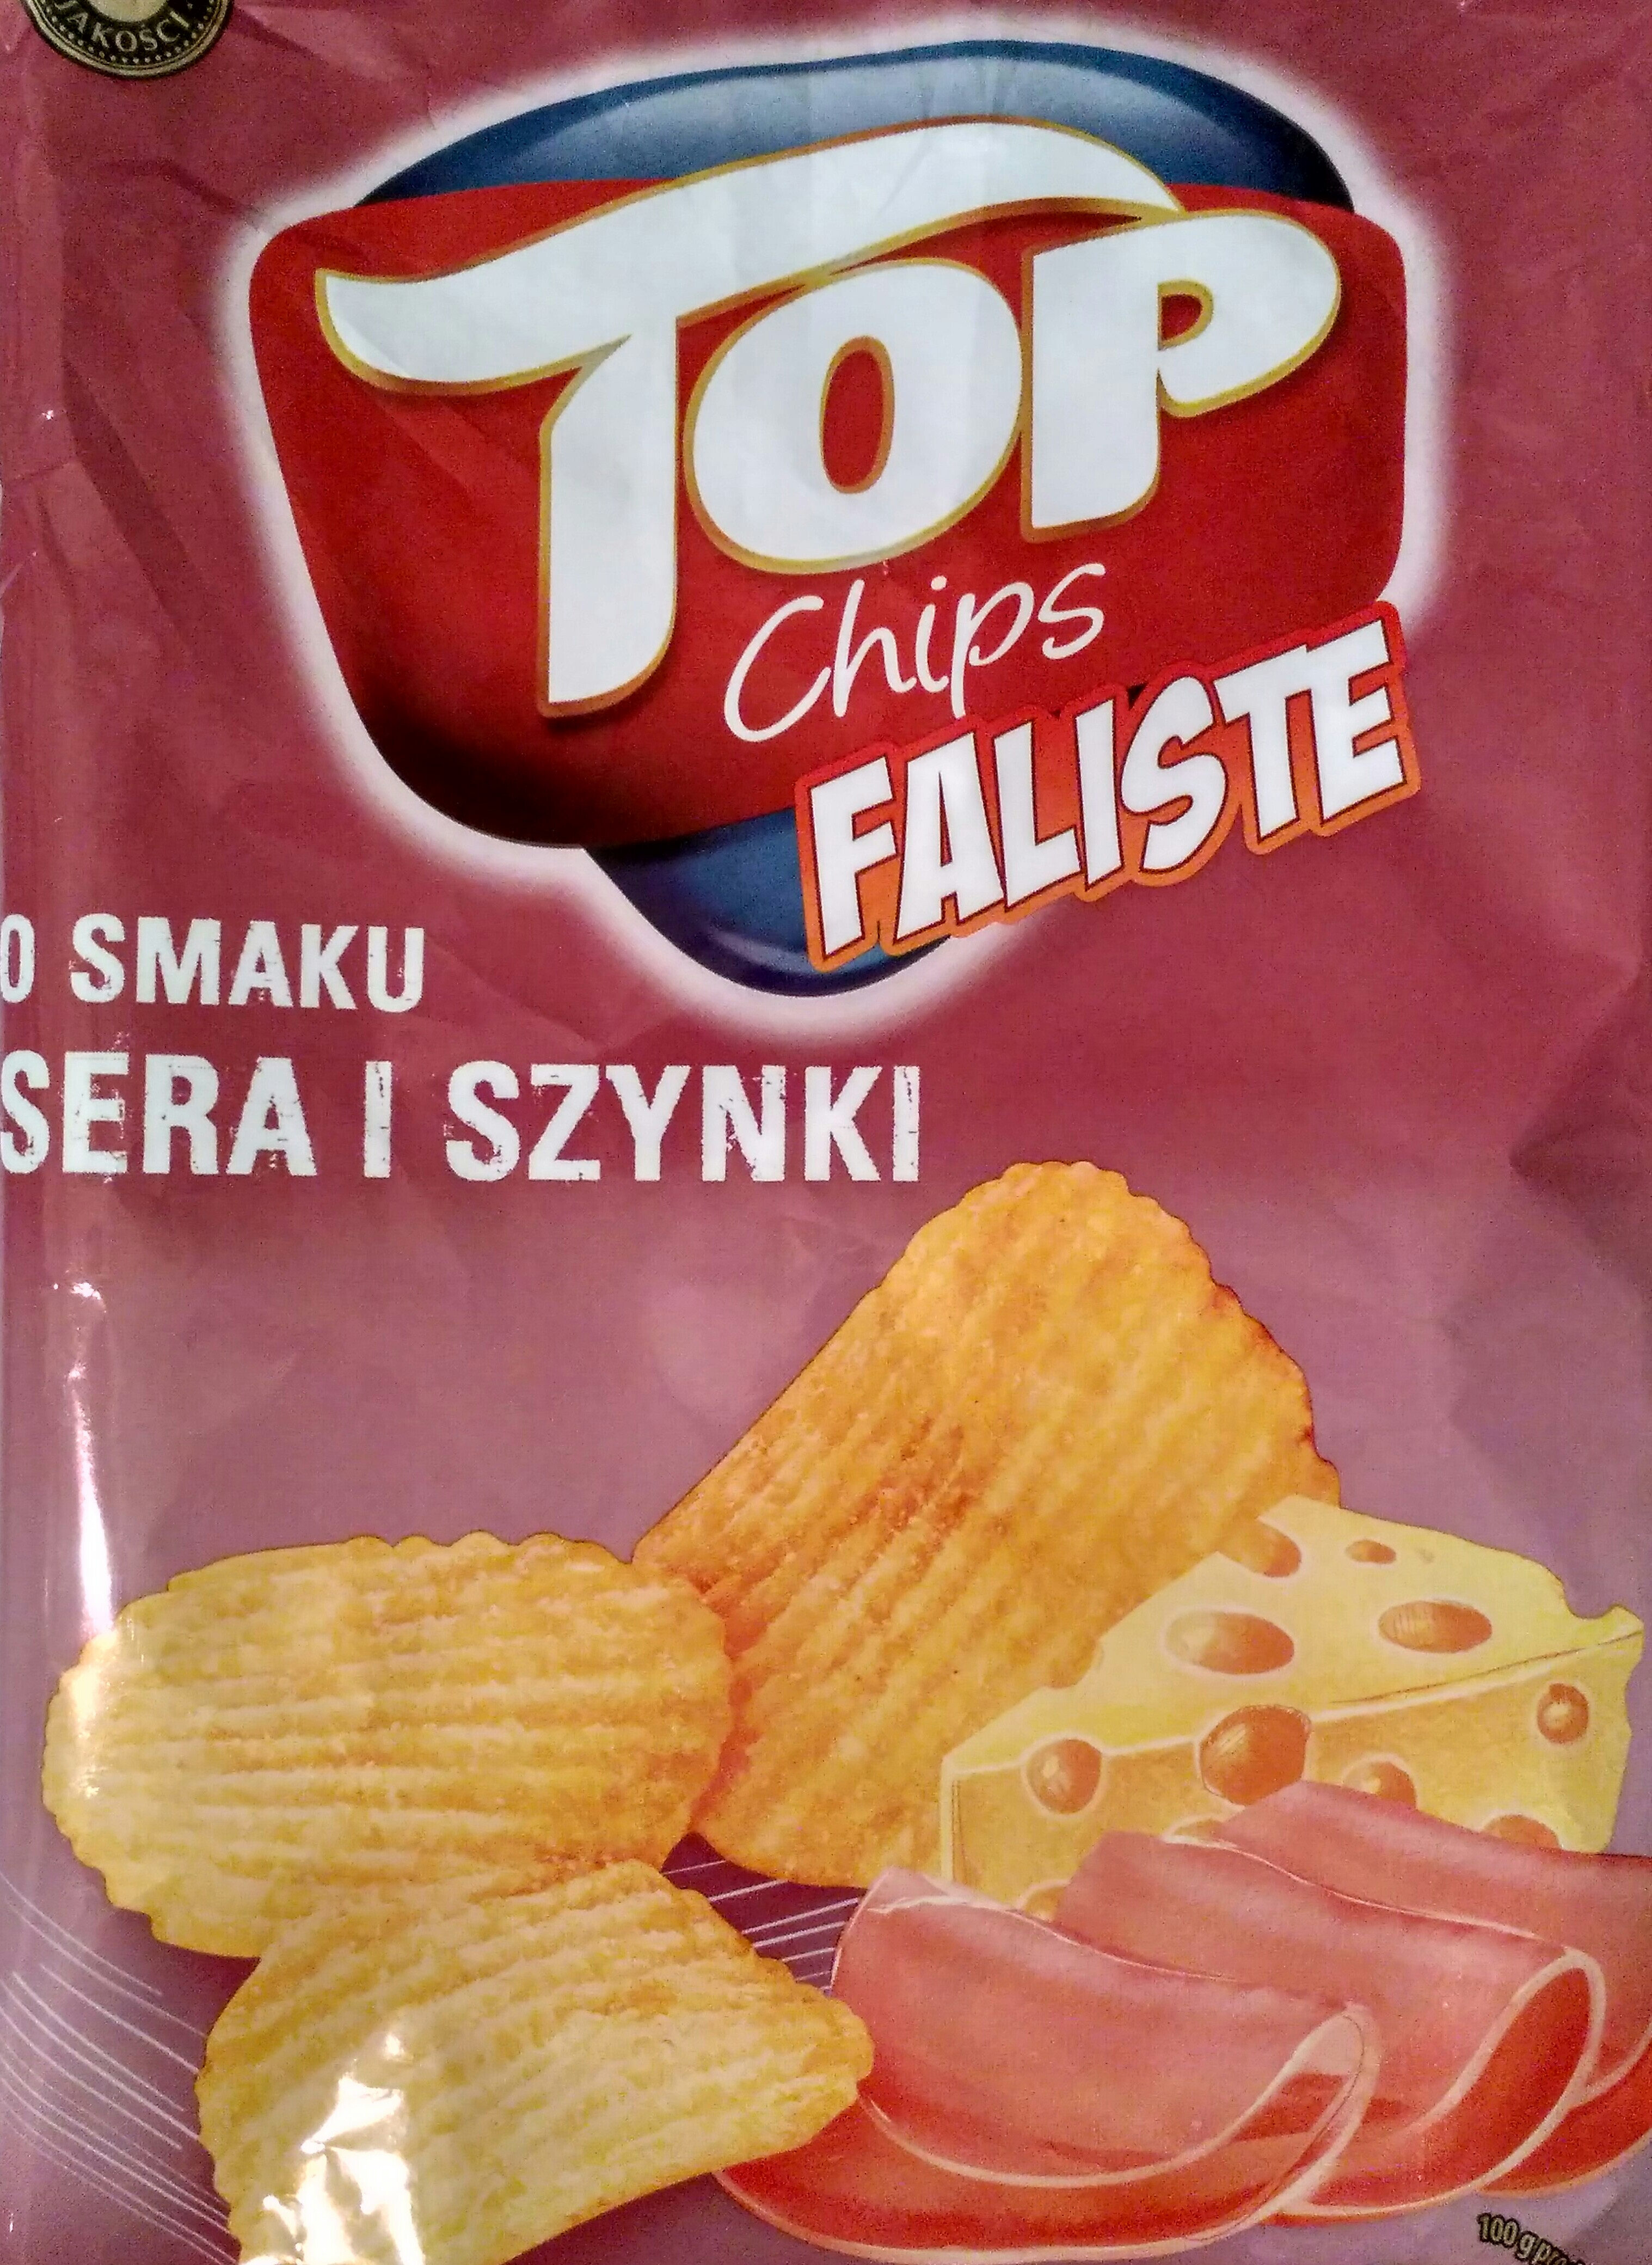 Top chips faliste - Product - pl